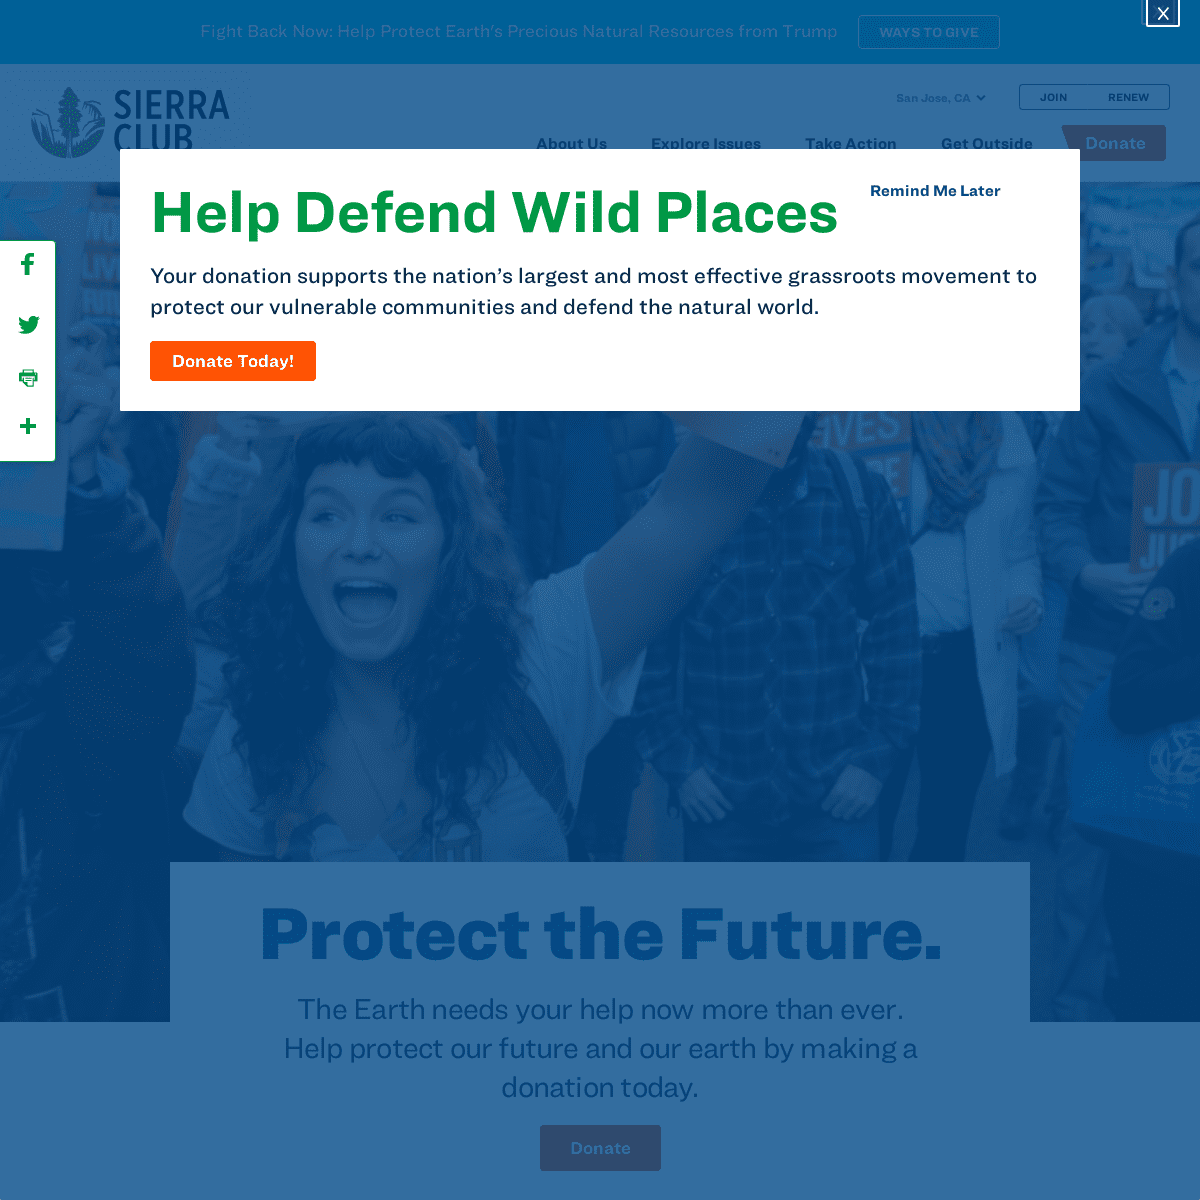 A complete backup of sierraclub.org